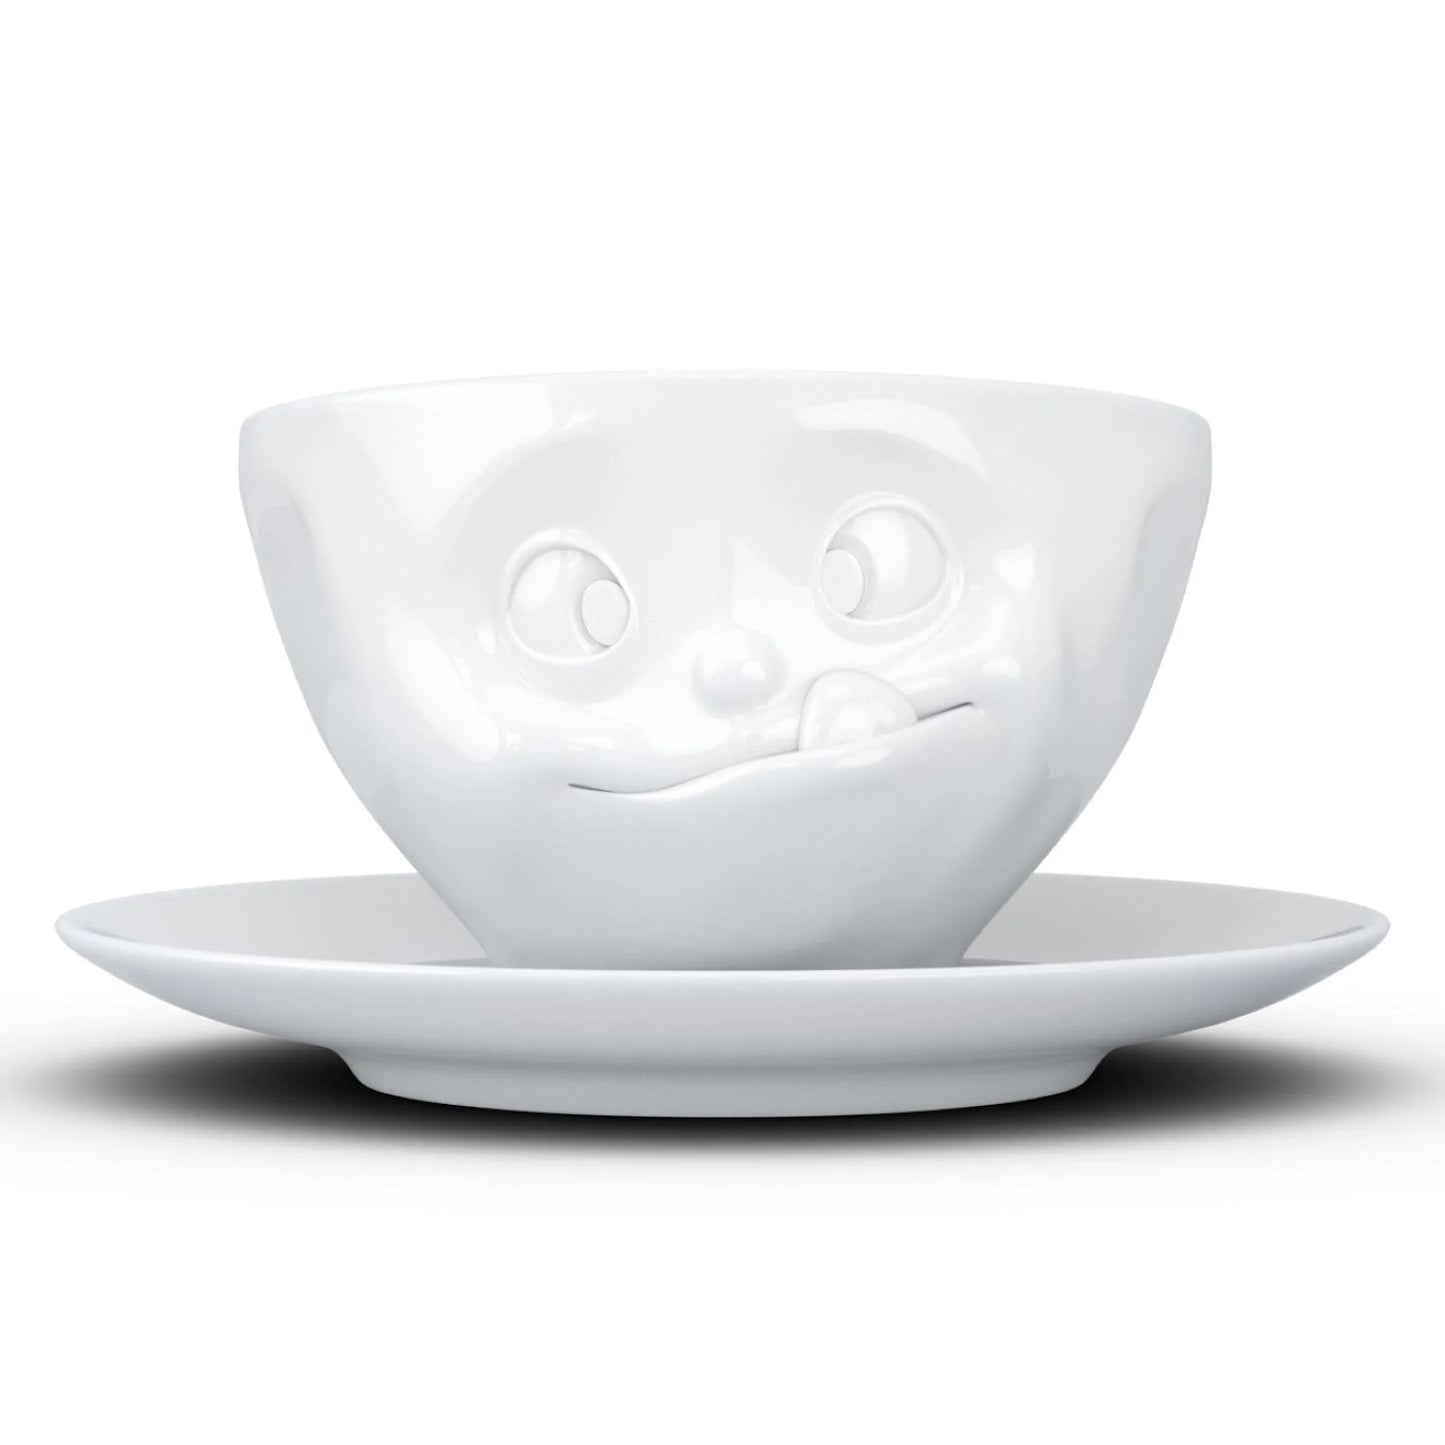 Cup with a facial expression and 6.5 oz capacity